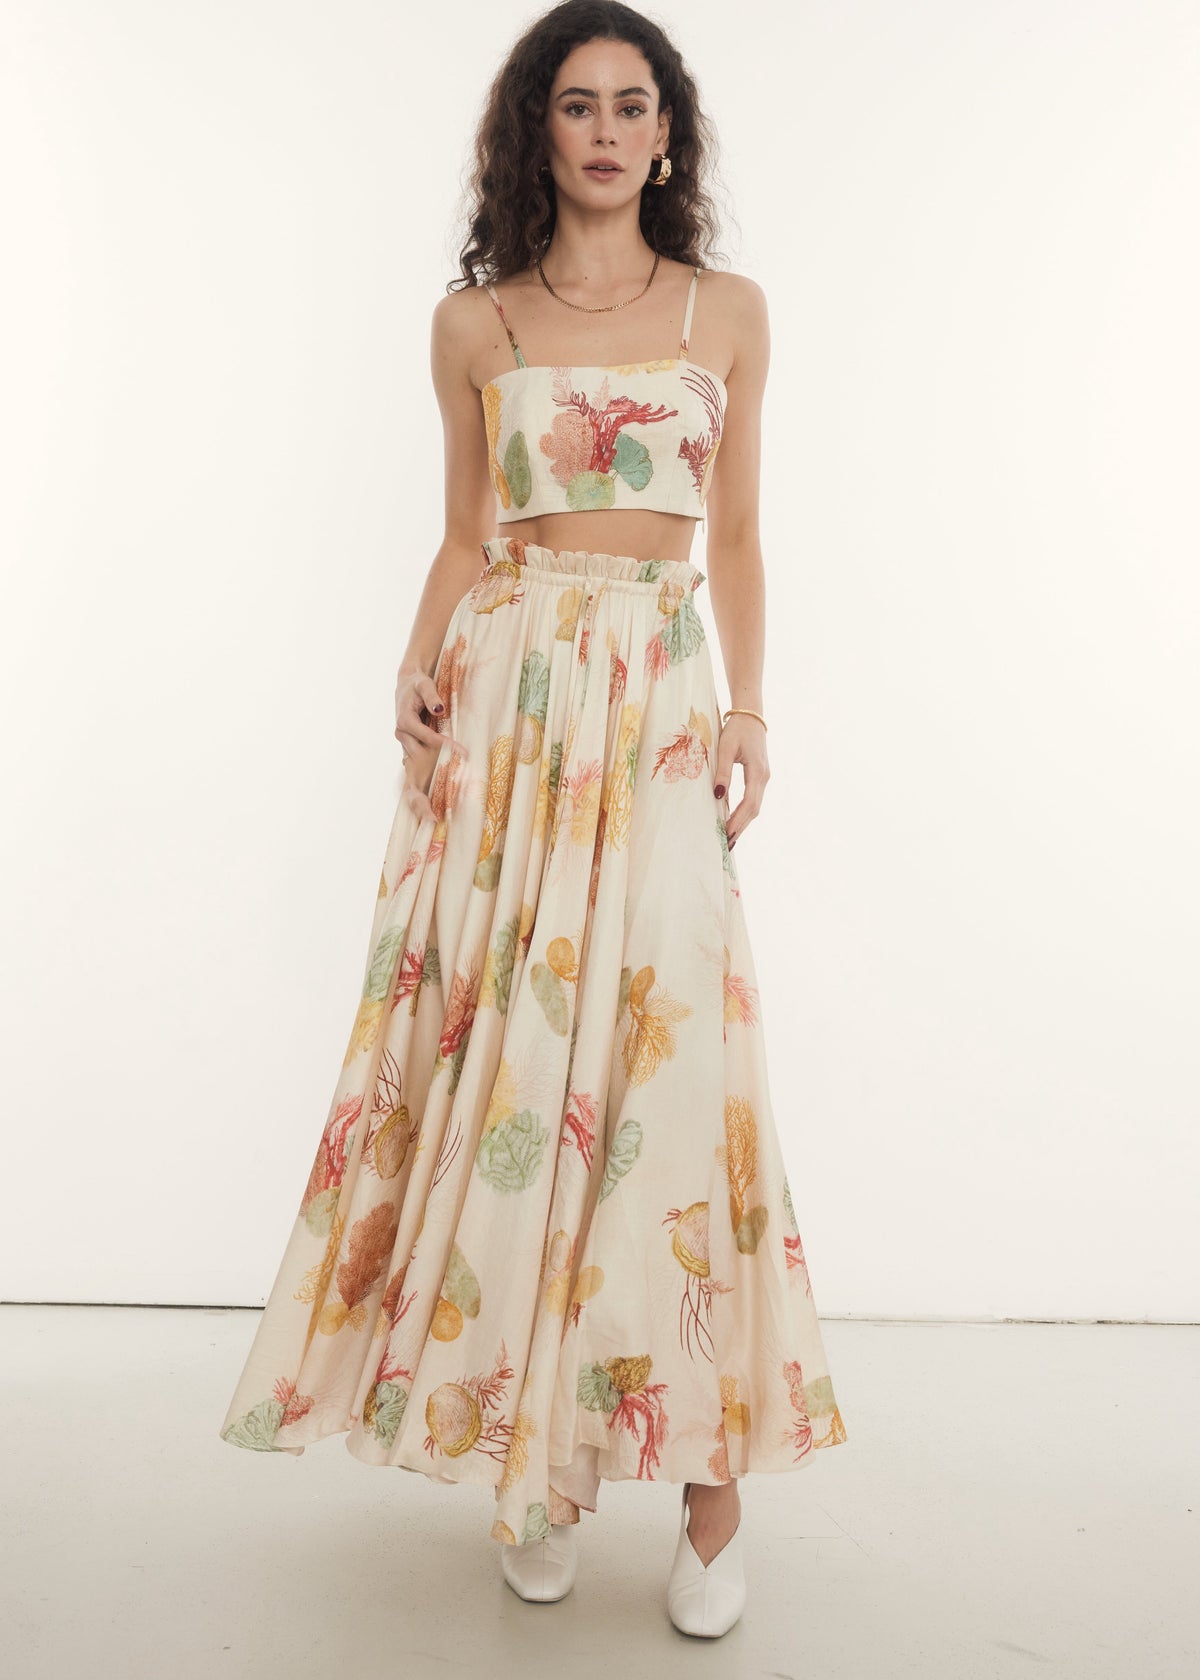 ocean printed sleeveless crop top with matching flowy maxi skirt